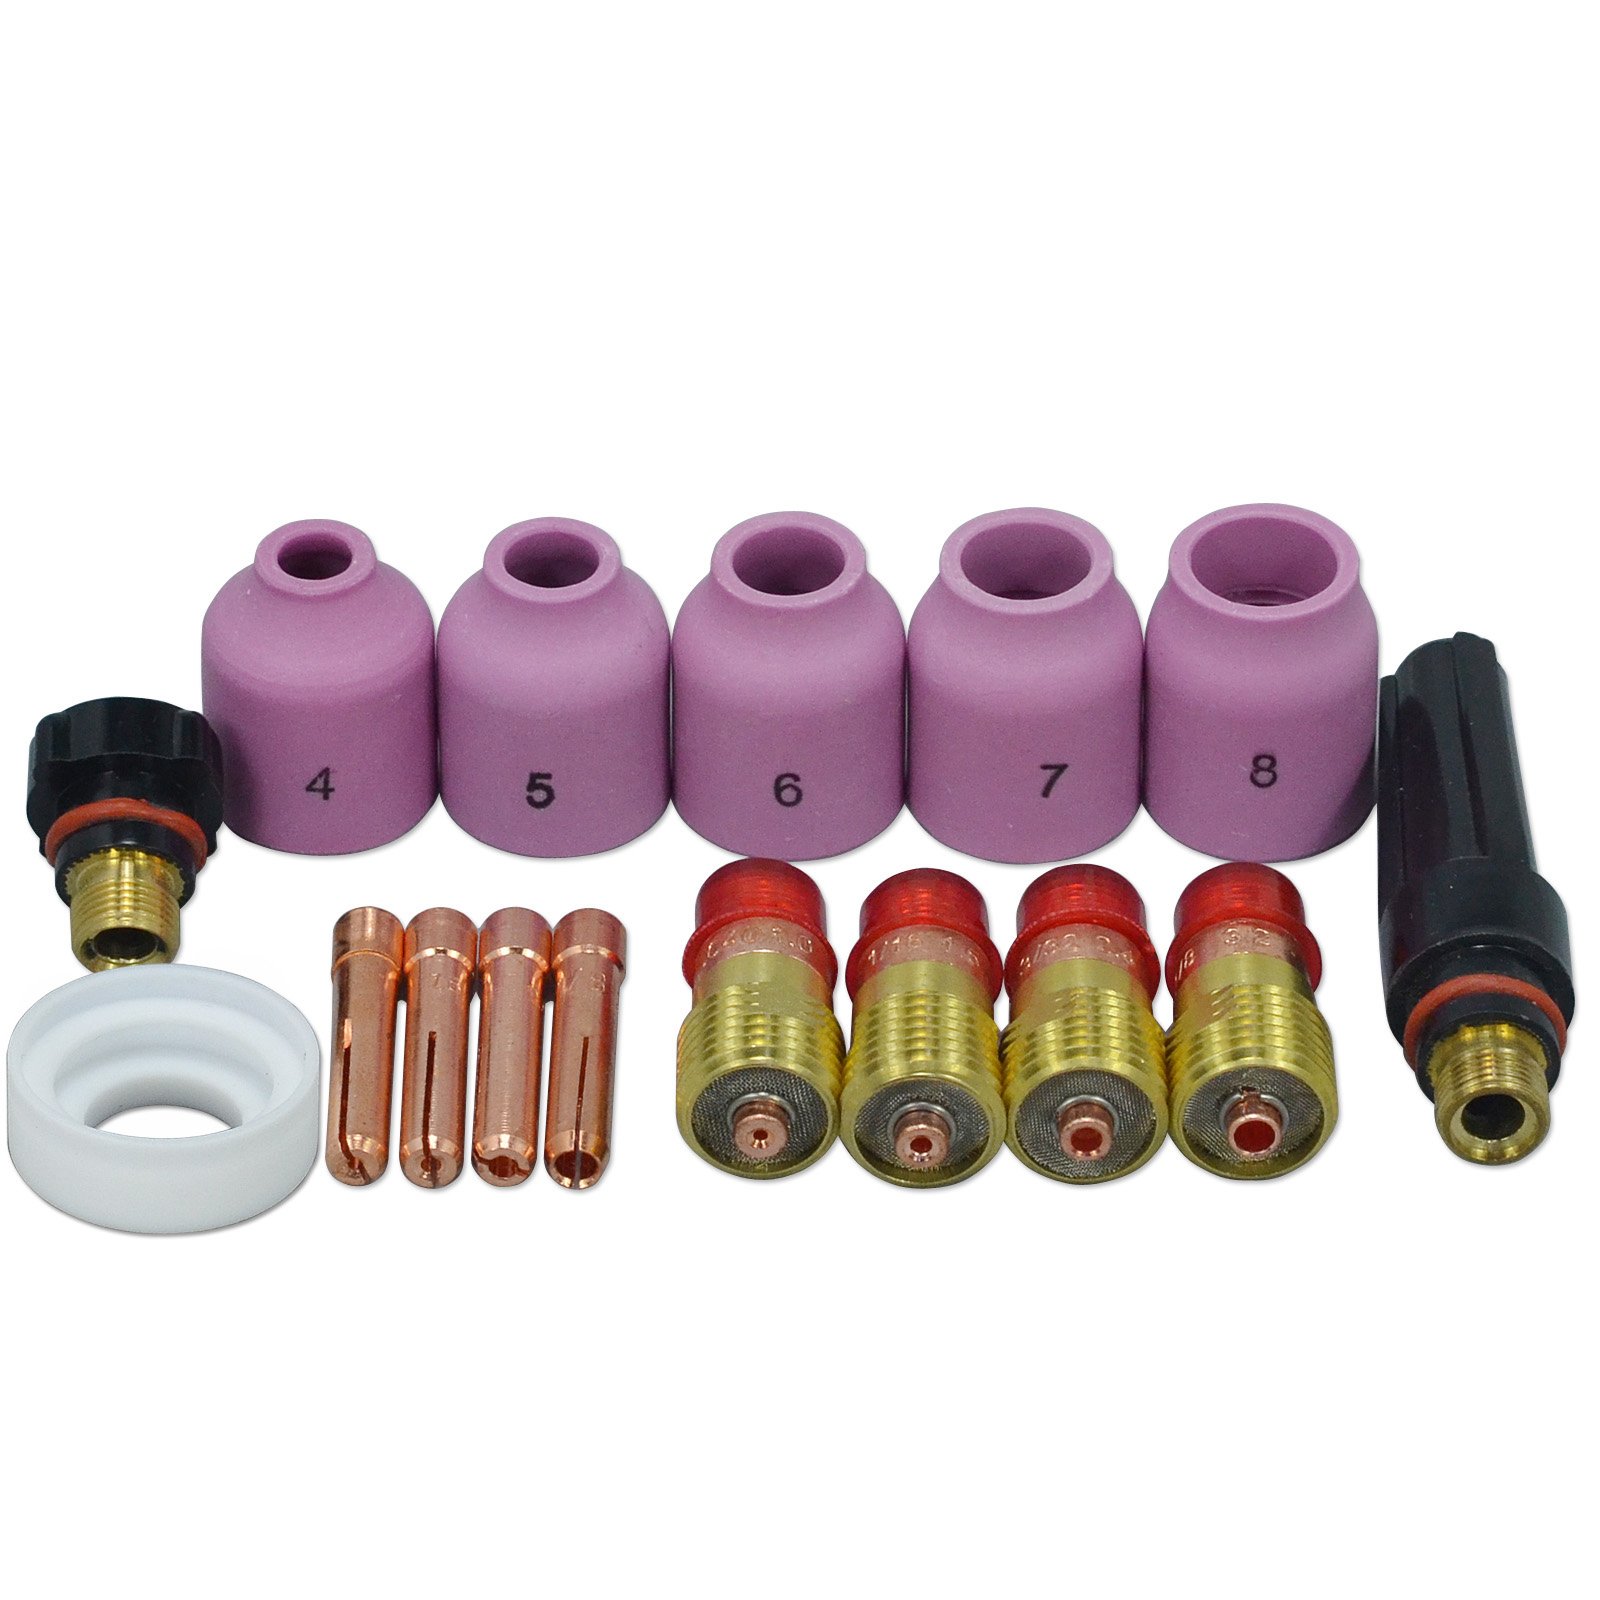 16 Pcs Large Gas Lens TIG Welding Torch Nozzle Cup Kit For WP-17/18/26 Series 